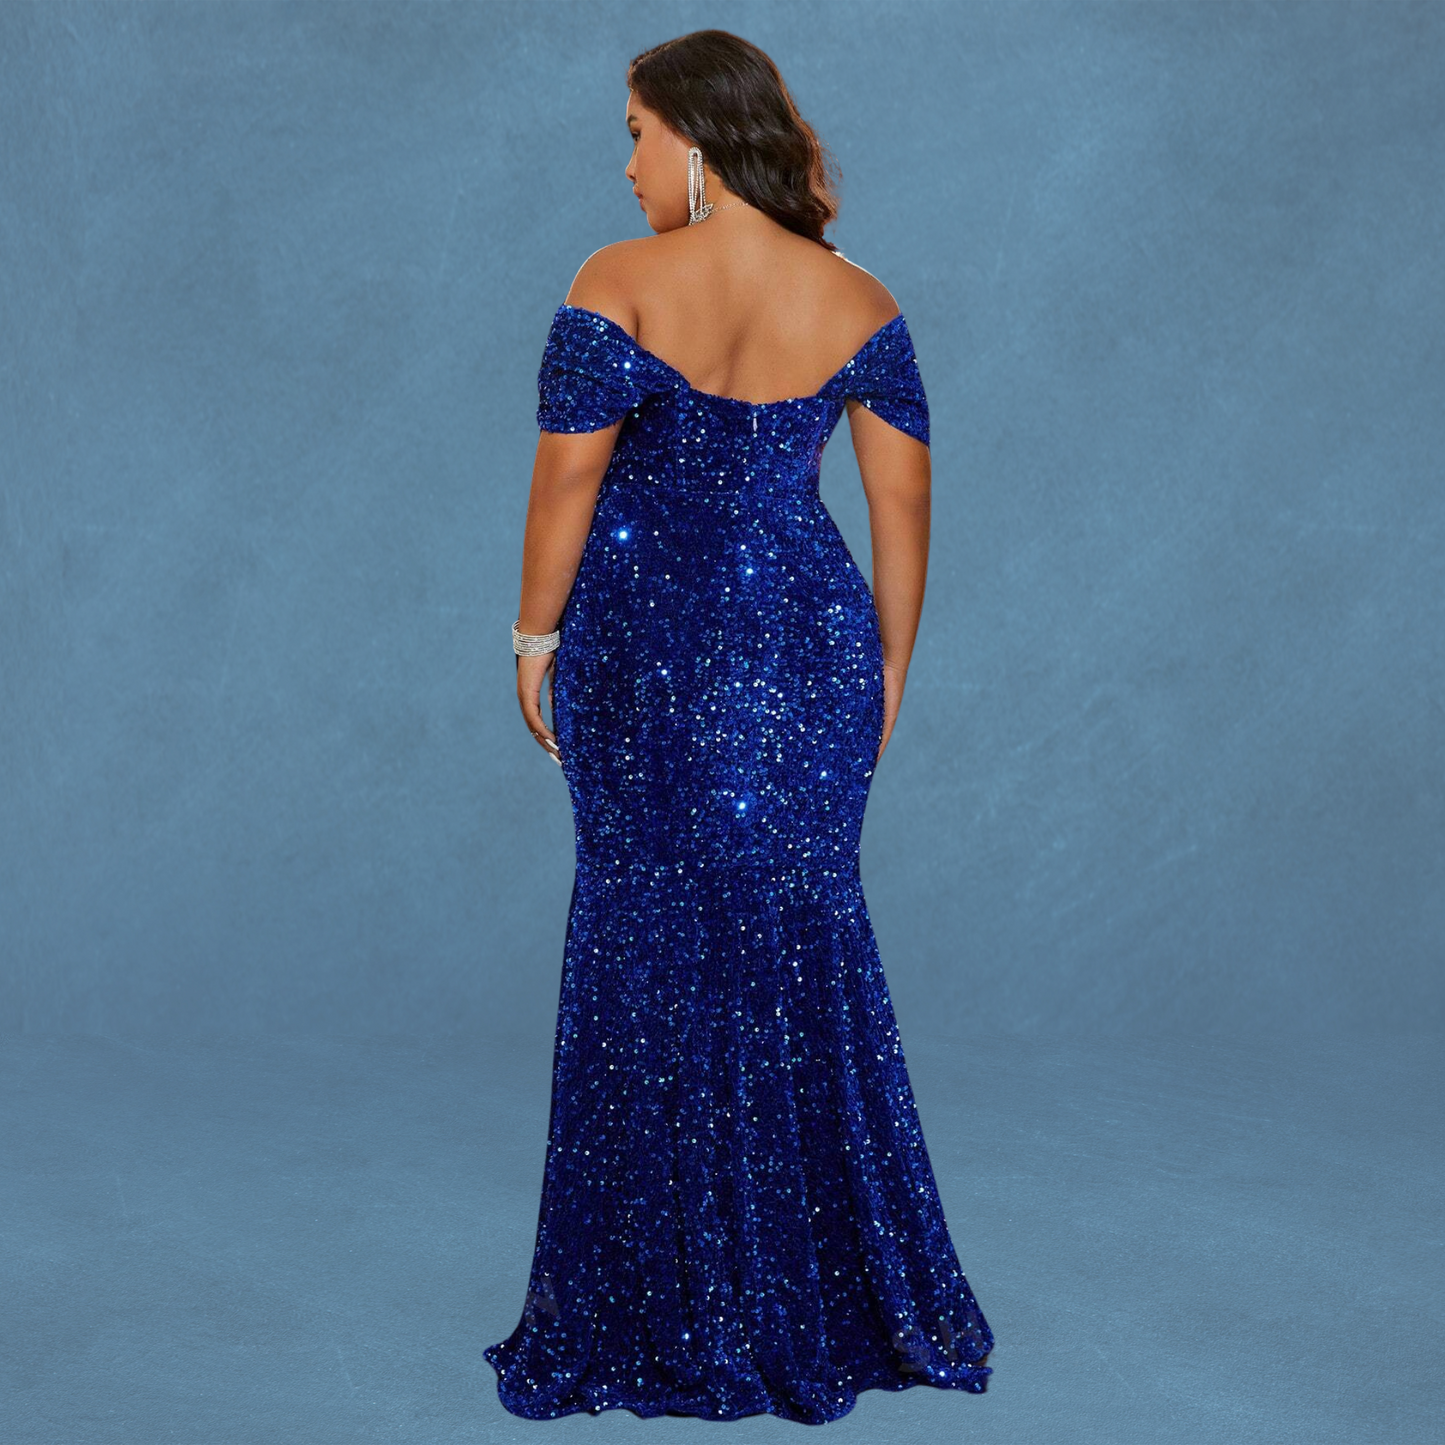 Stunning Plus Size Off-Shoulder Sequin Bodycon Dress Perfect for Prom, Wedding Guest, Bridesmaid